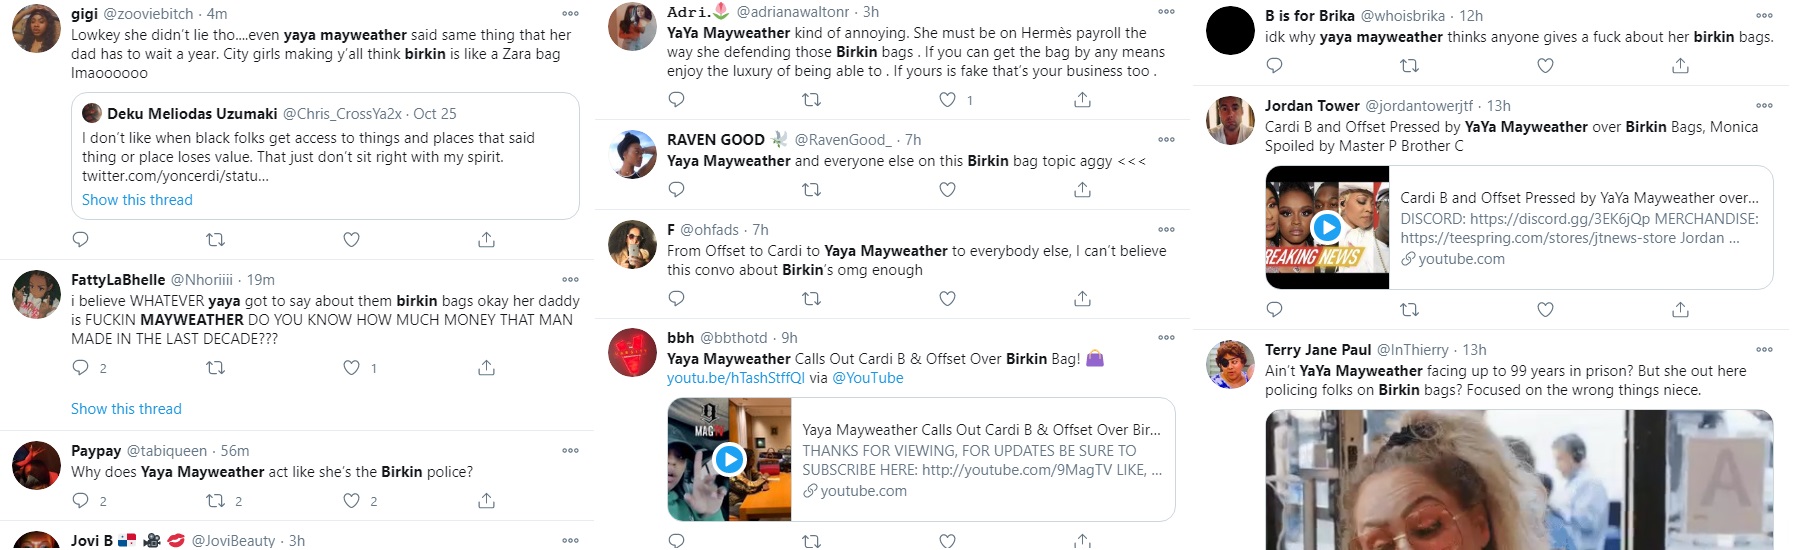 Yaya Mayweather inserted herself into the Birkin bag discussion, this weekend. Last night, Cardi B chimed in, so Yaya spoke out, again, doubling down on the talk about knowing all about Birkin bags. Since then, Melissa Rene, Yaya's mother, showed off her daughter's Birkin collection, on IG Live, leading to Twitter coming with jokes, calling Yaya the "Birkin police," or "Birkin patrol."